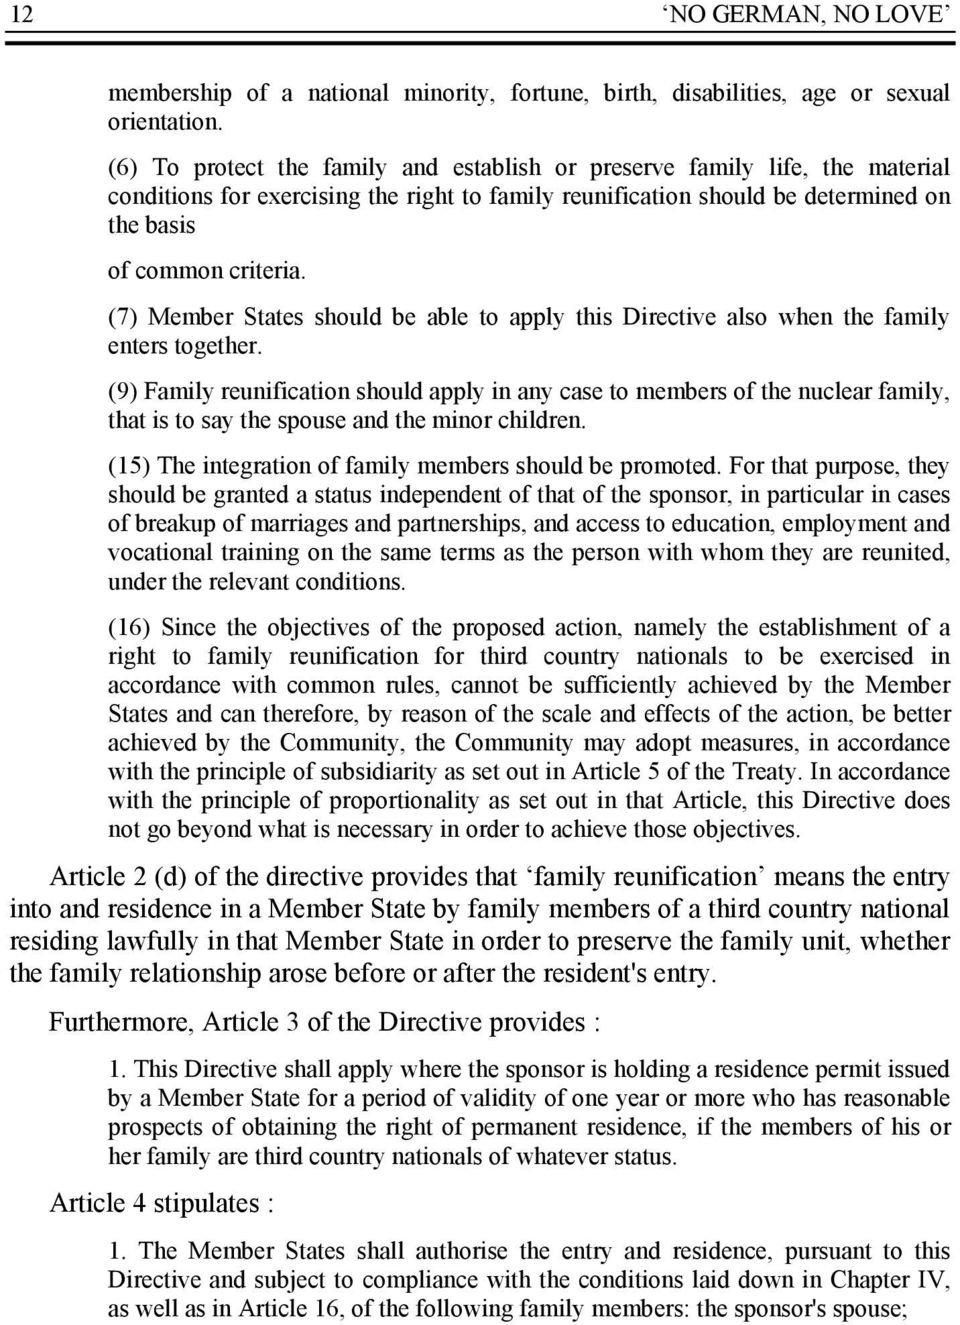 (7) Member States should be able to apply this Directive also when the family enters together.